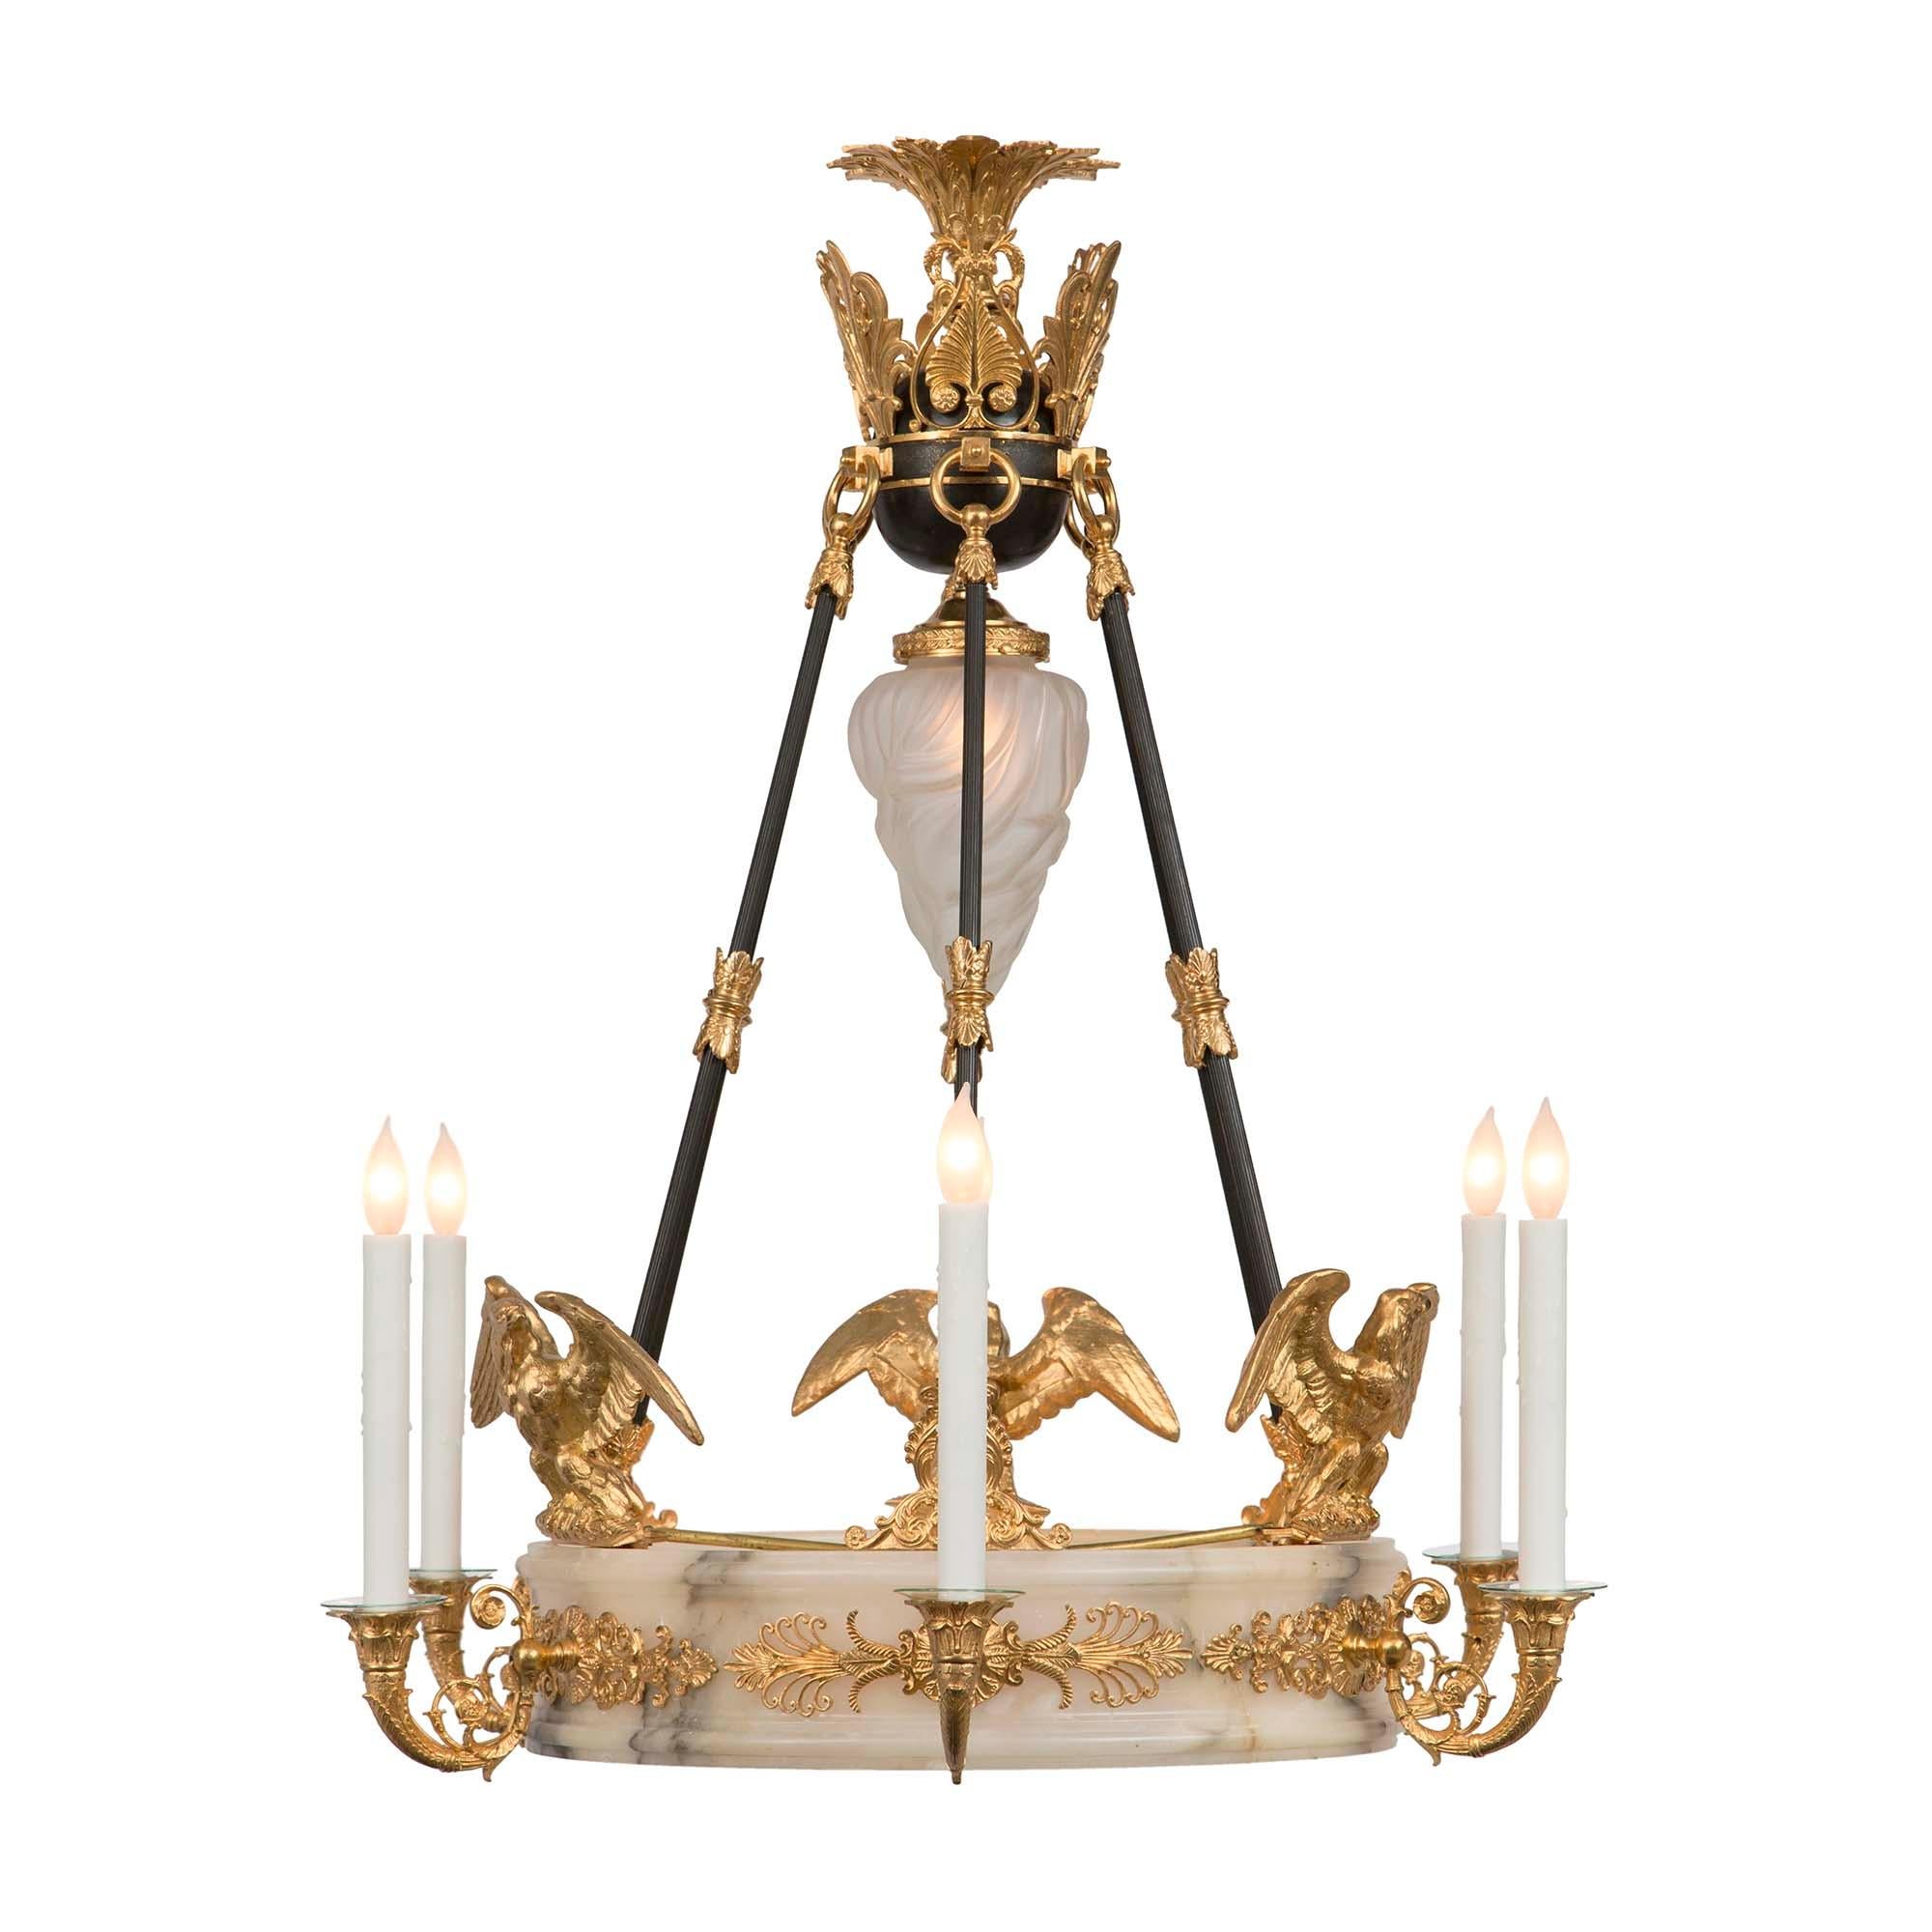 A magnificent French 19th century Empire neo-classical st. alabaster and ormolu chandelier. This six light chandelier has an oval shape alabaster moulded edge base decorated with a pierced ormolu foliate frieze. The six very decorative C scrolled